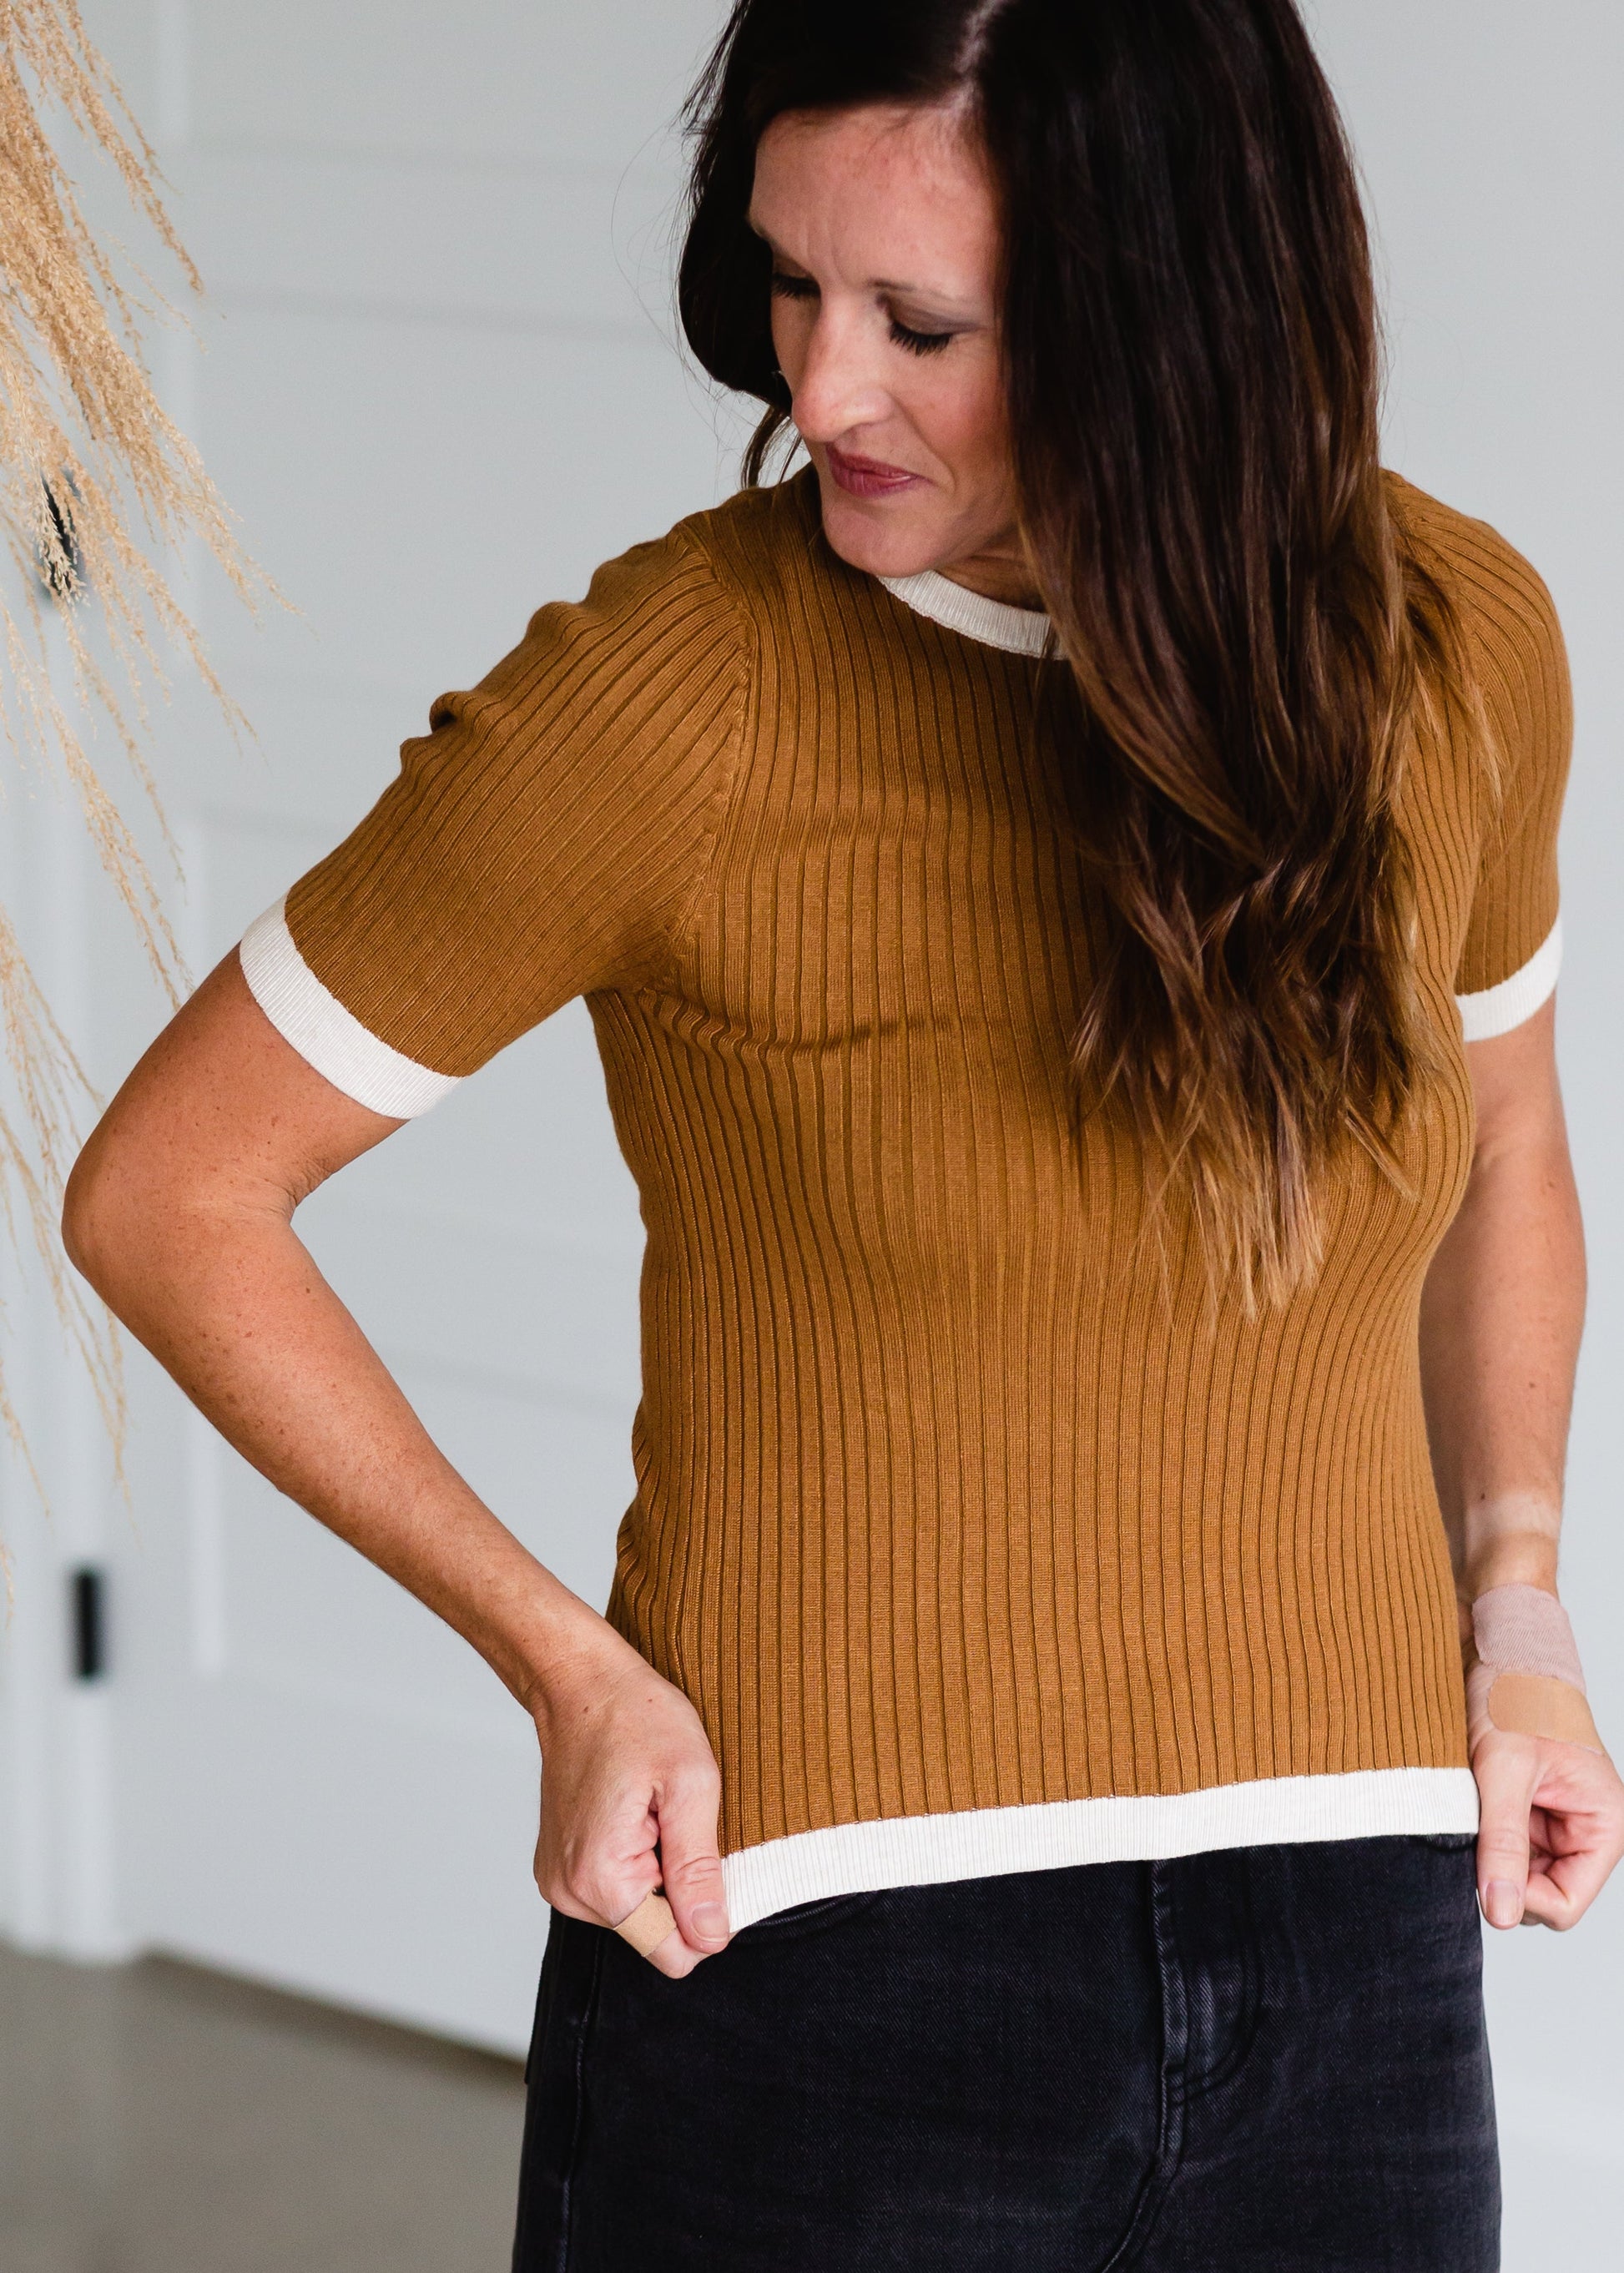 Mustard Contrast Ribbed Knit Top - FINAL SALE Shirt